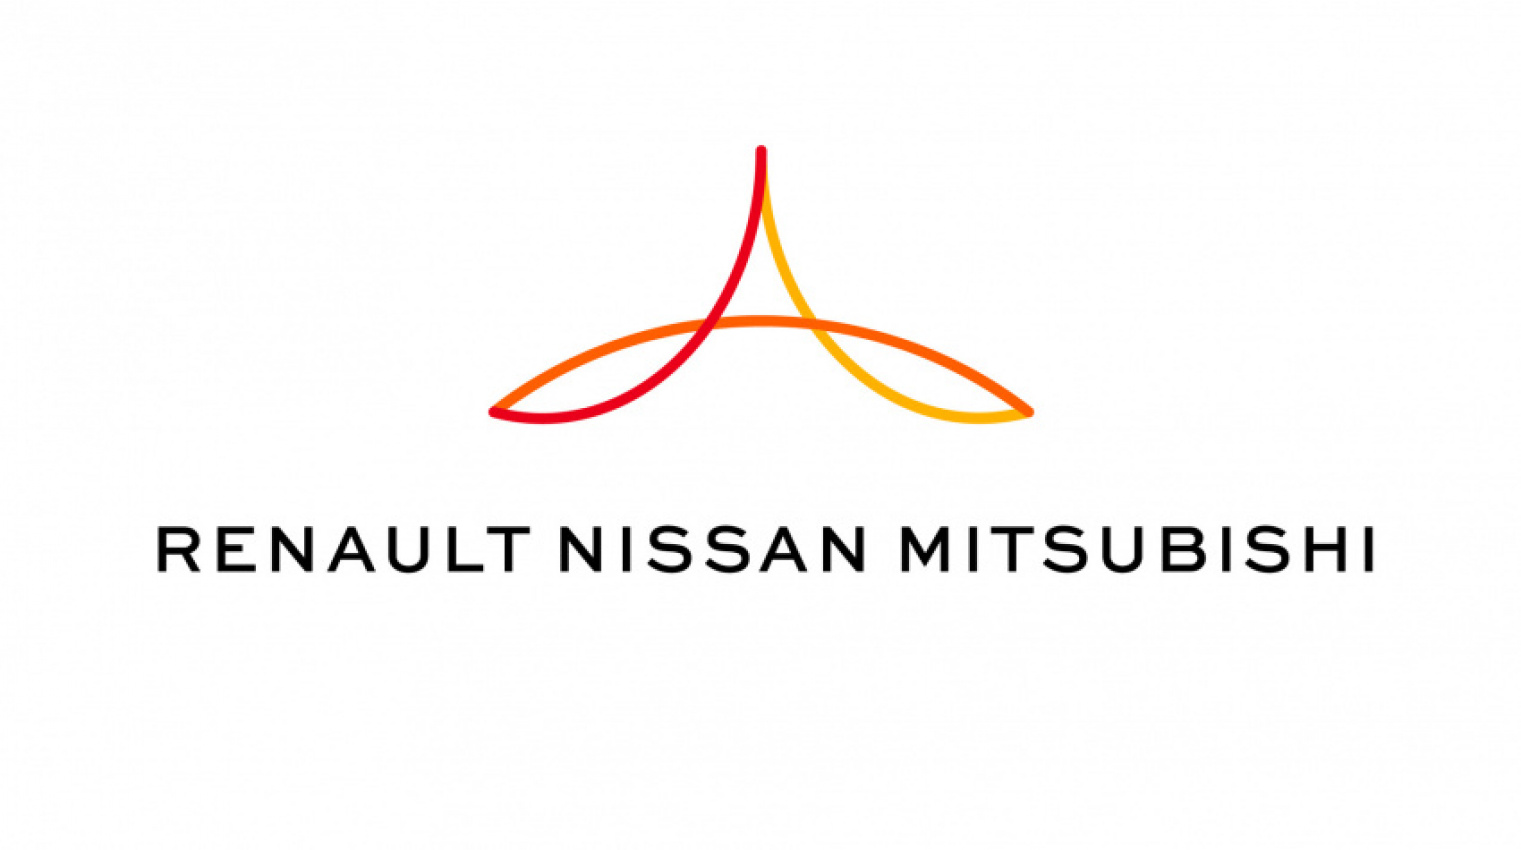 autos, cars, mitsubishi, nissan, renault, alpine, electric cars, industry, mitsubishi news, nissan news, renault nissan mitsubishi alliance plans 35 evs, solid-state batteries by 2030